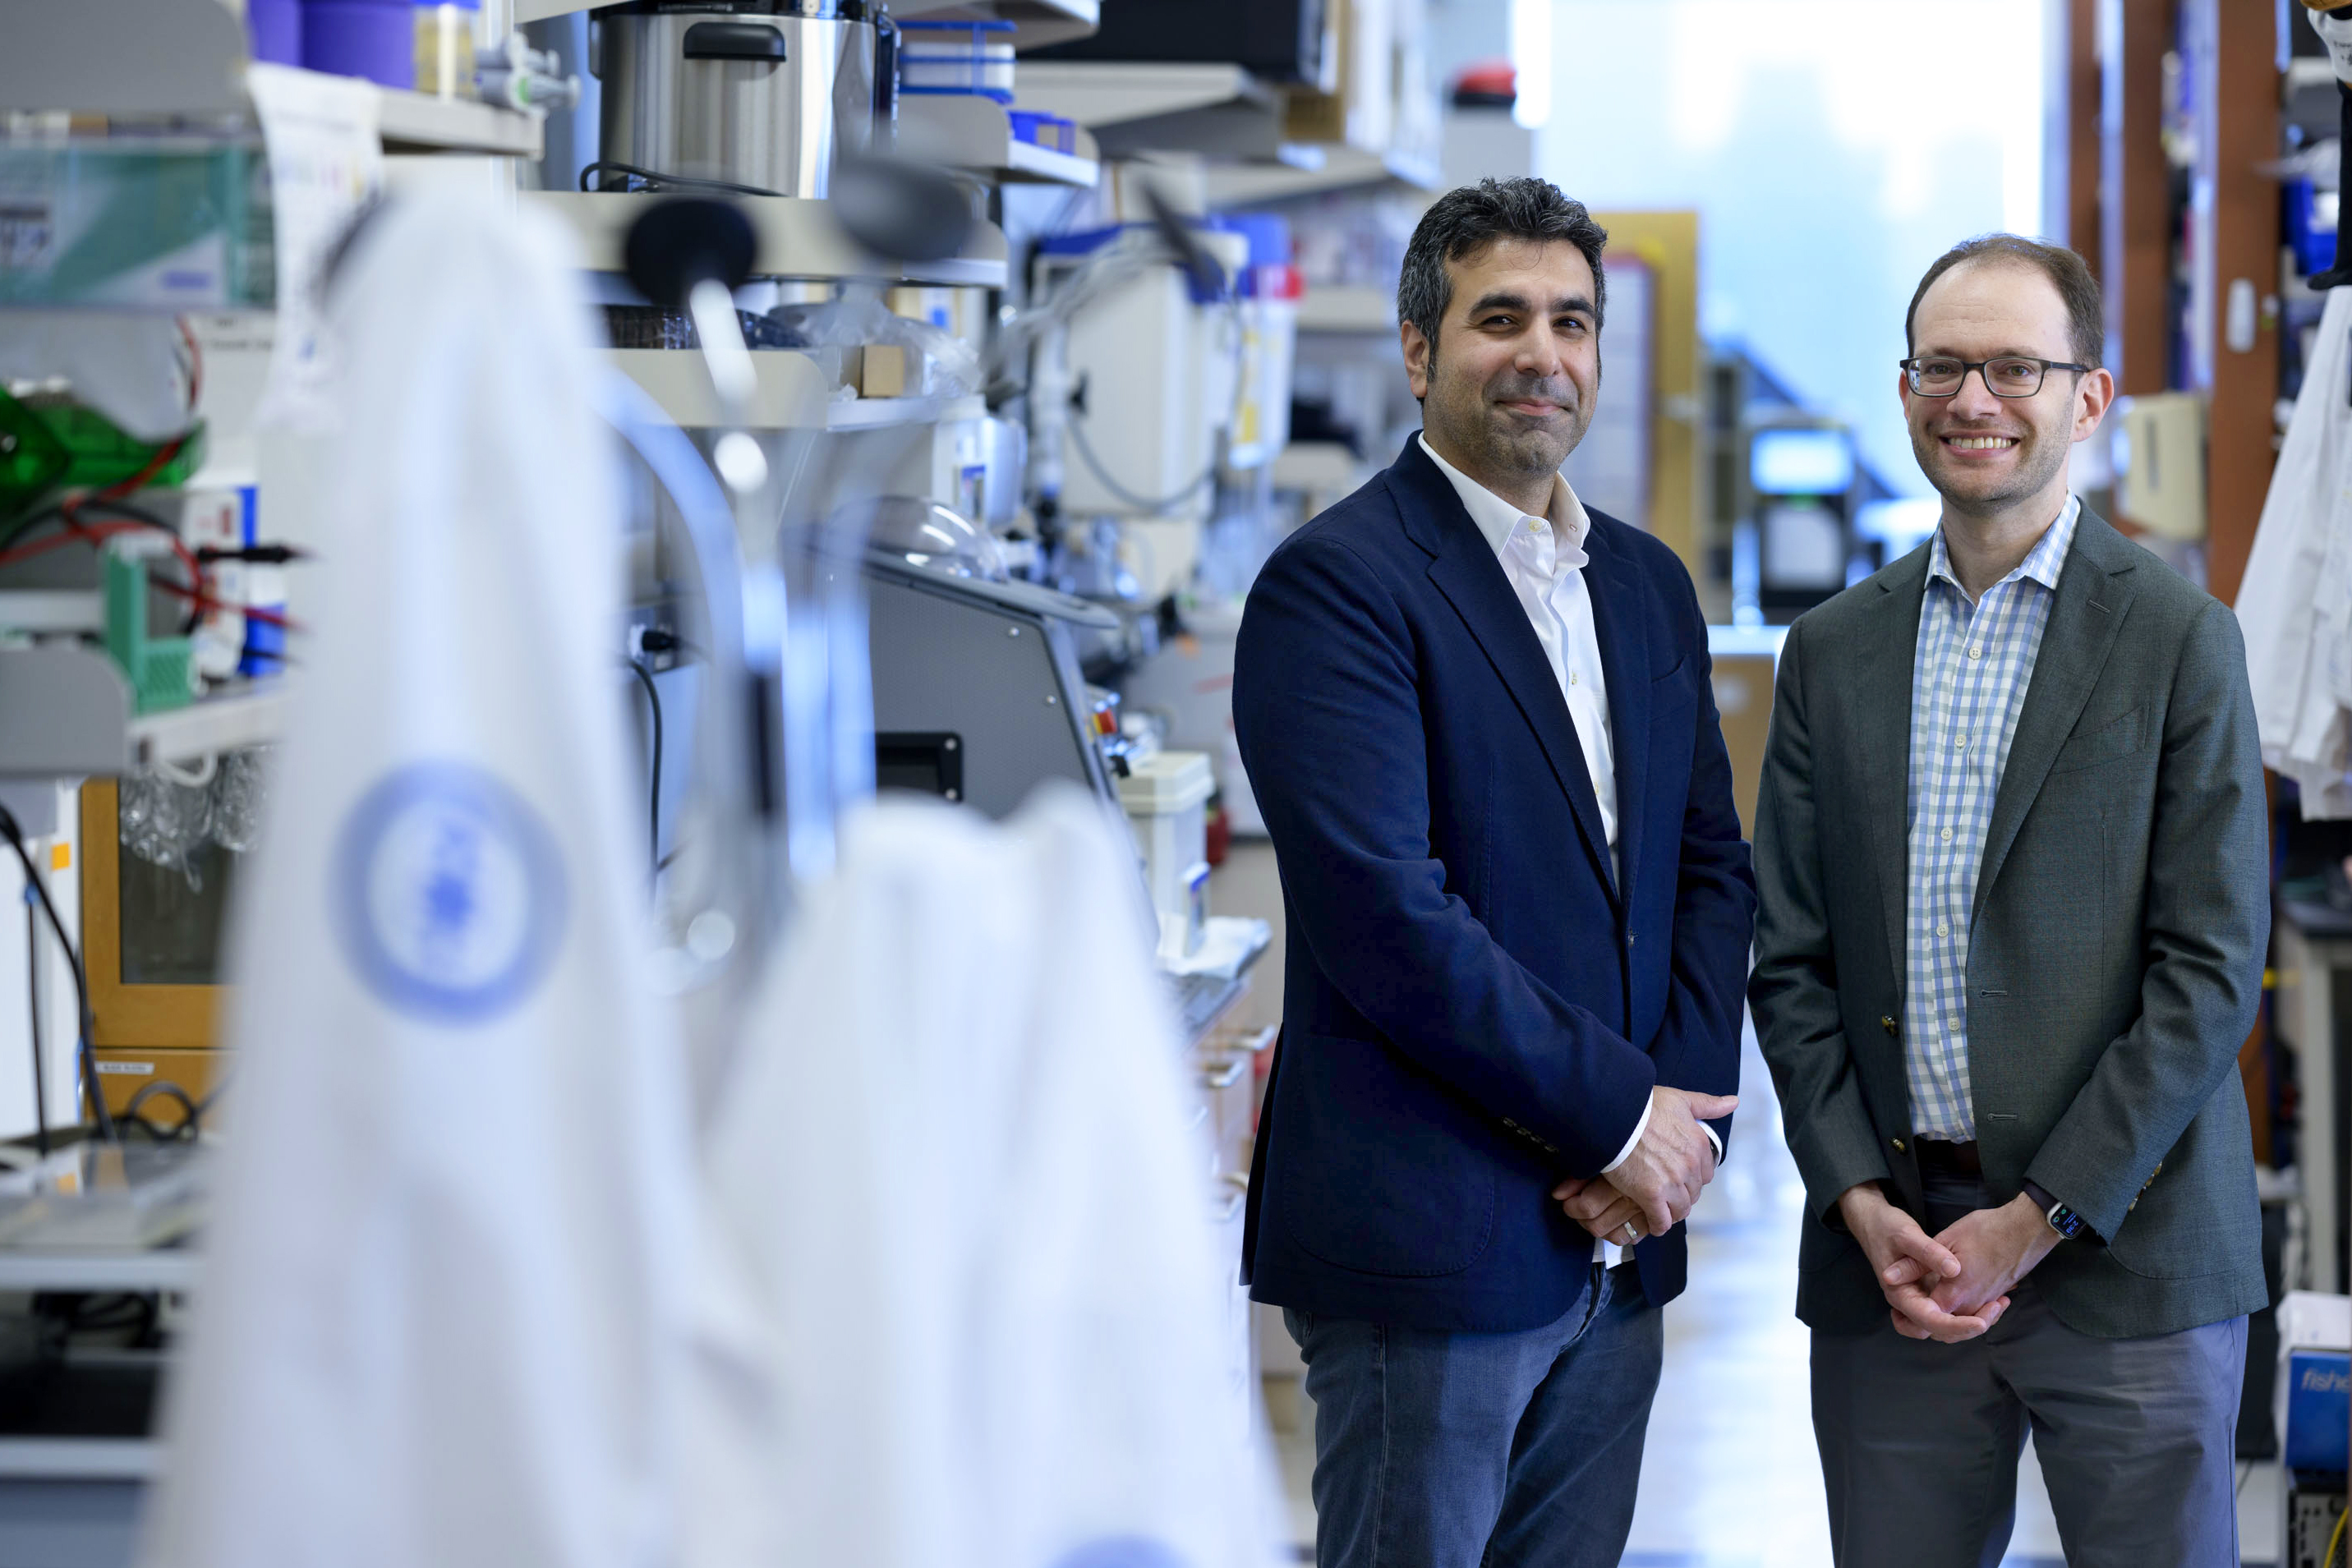 Dr. Kayvan Keshari (L) and Dr. Daniel Heller (R) are the co-directors of The Pat and Ian Cook Doctoral Program in Cancer Engineering.